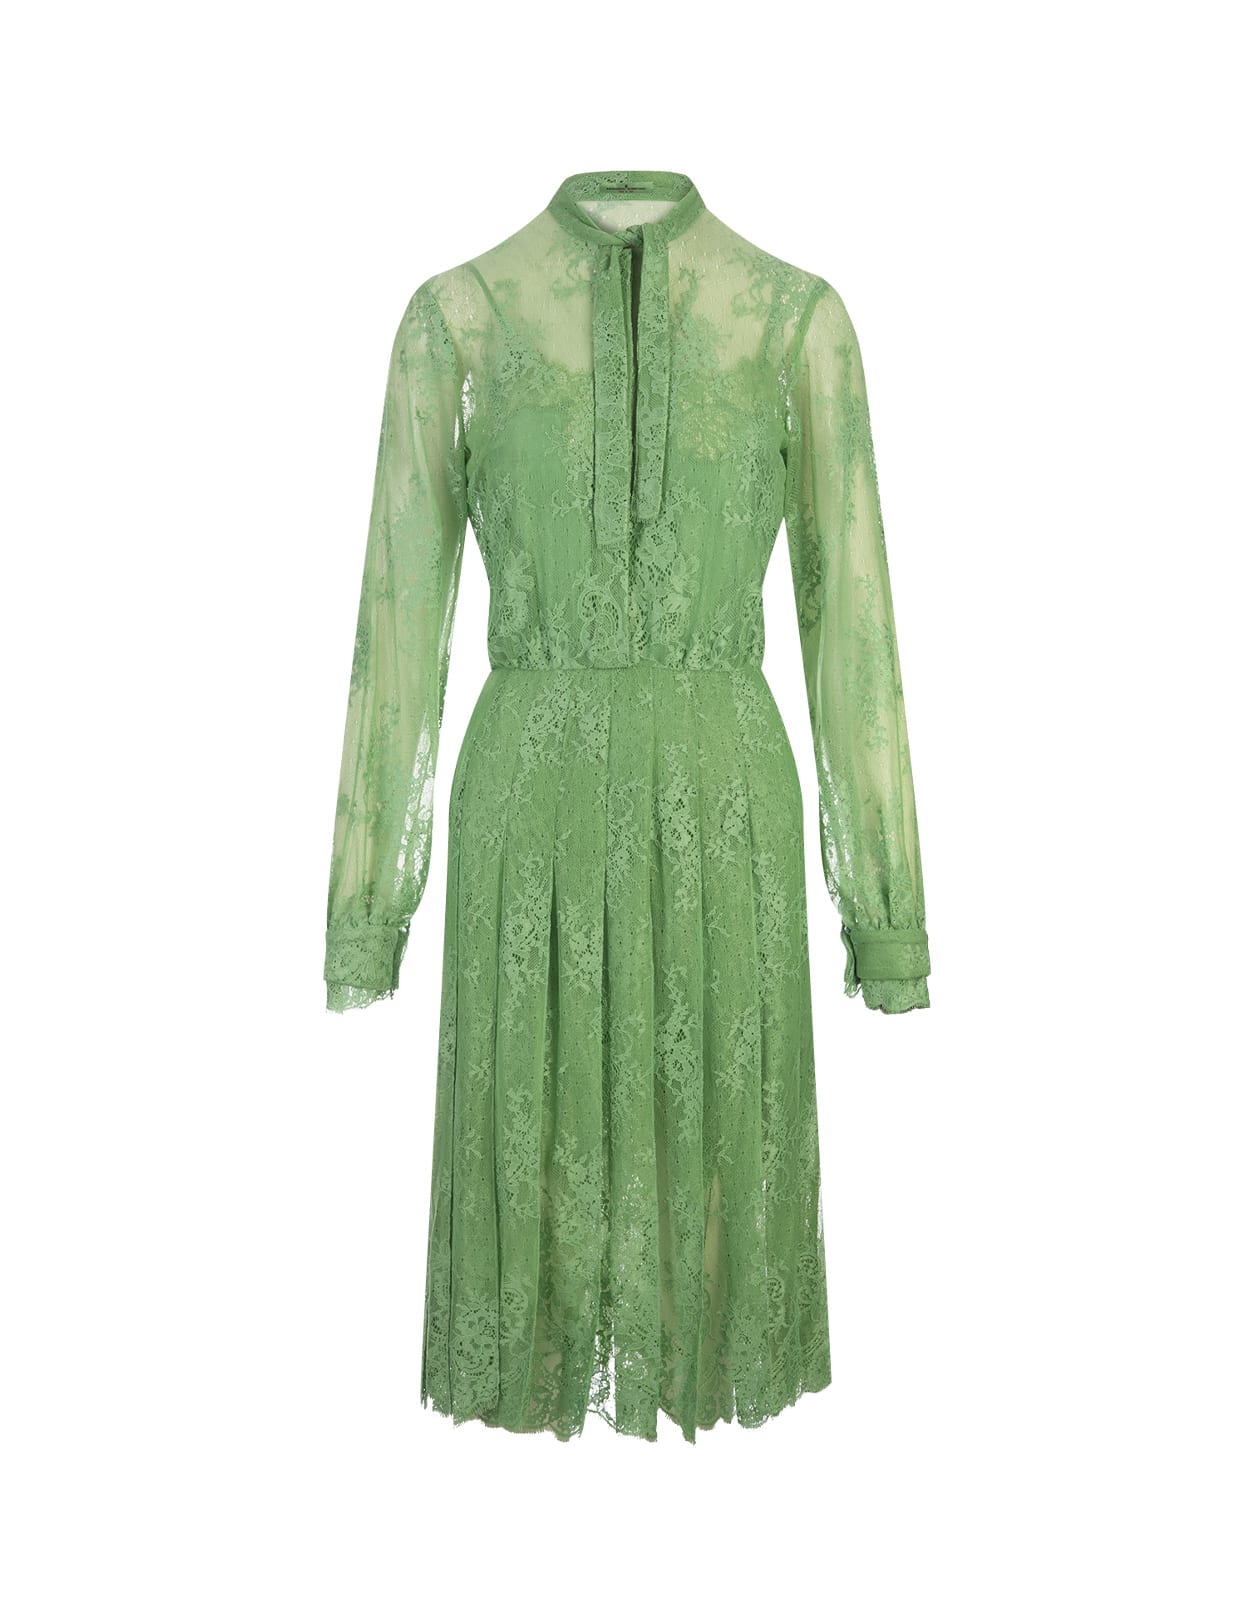 Green Lace Dress With Long Sleeve And Collar Bow